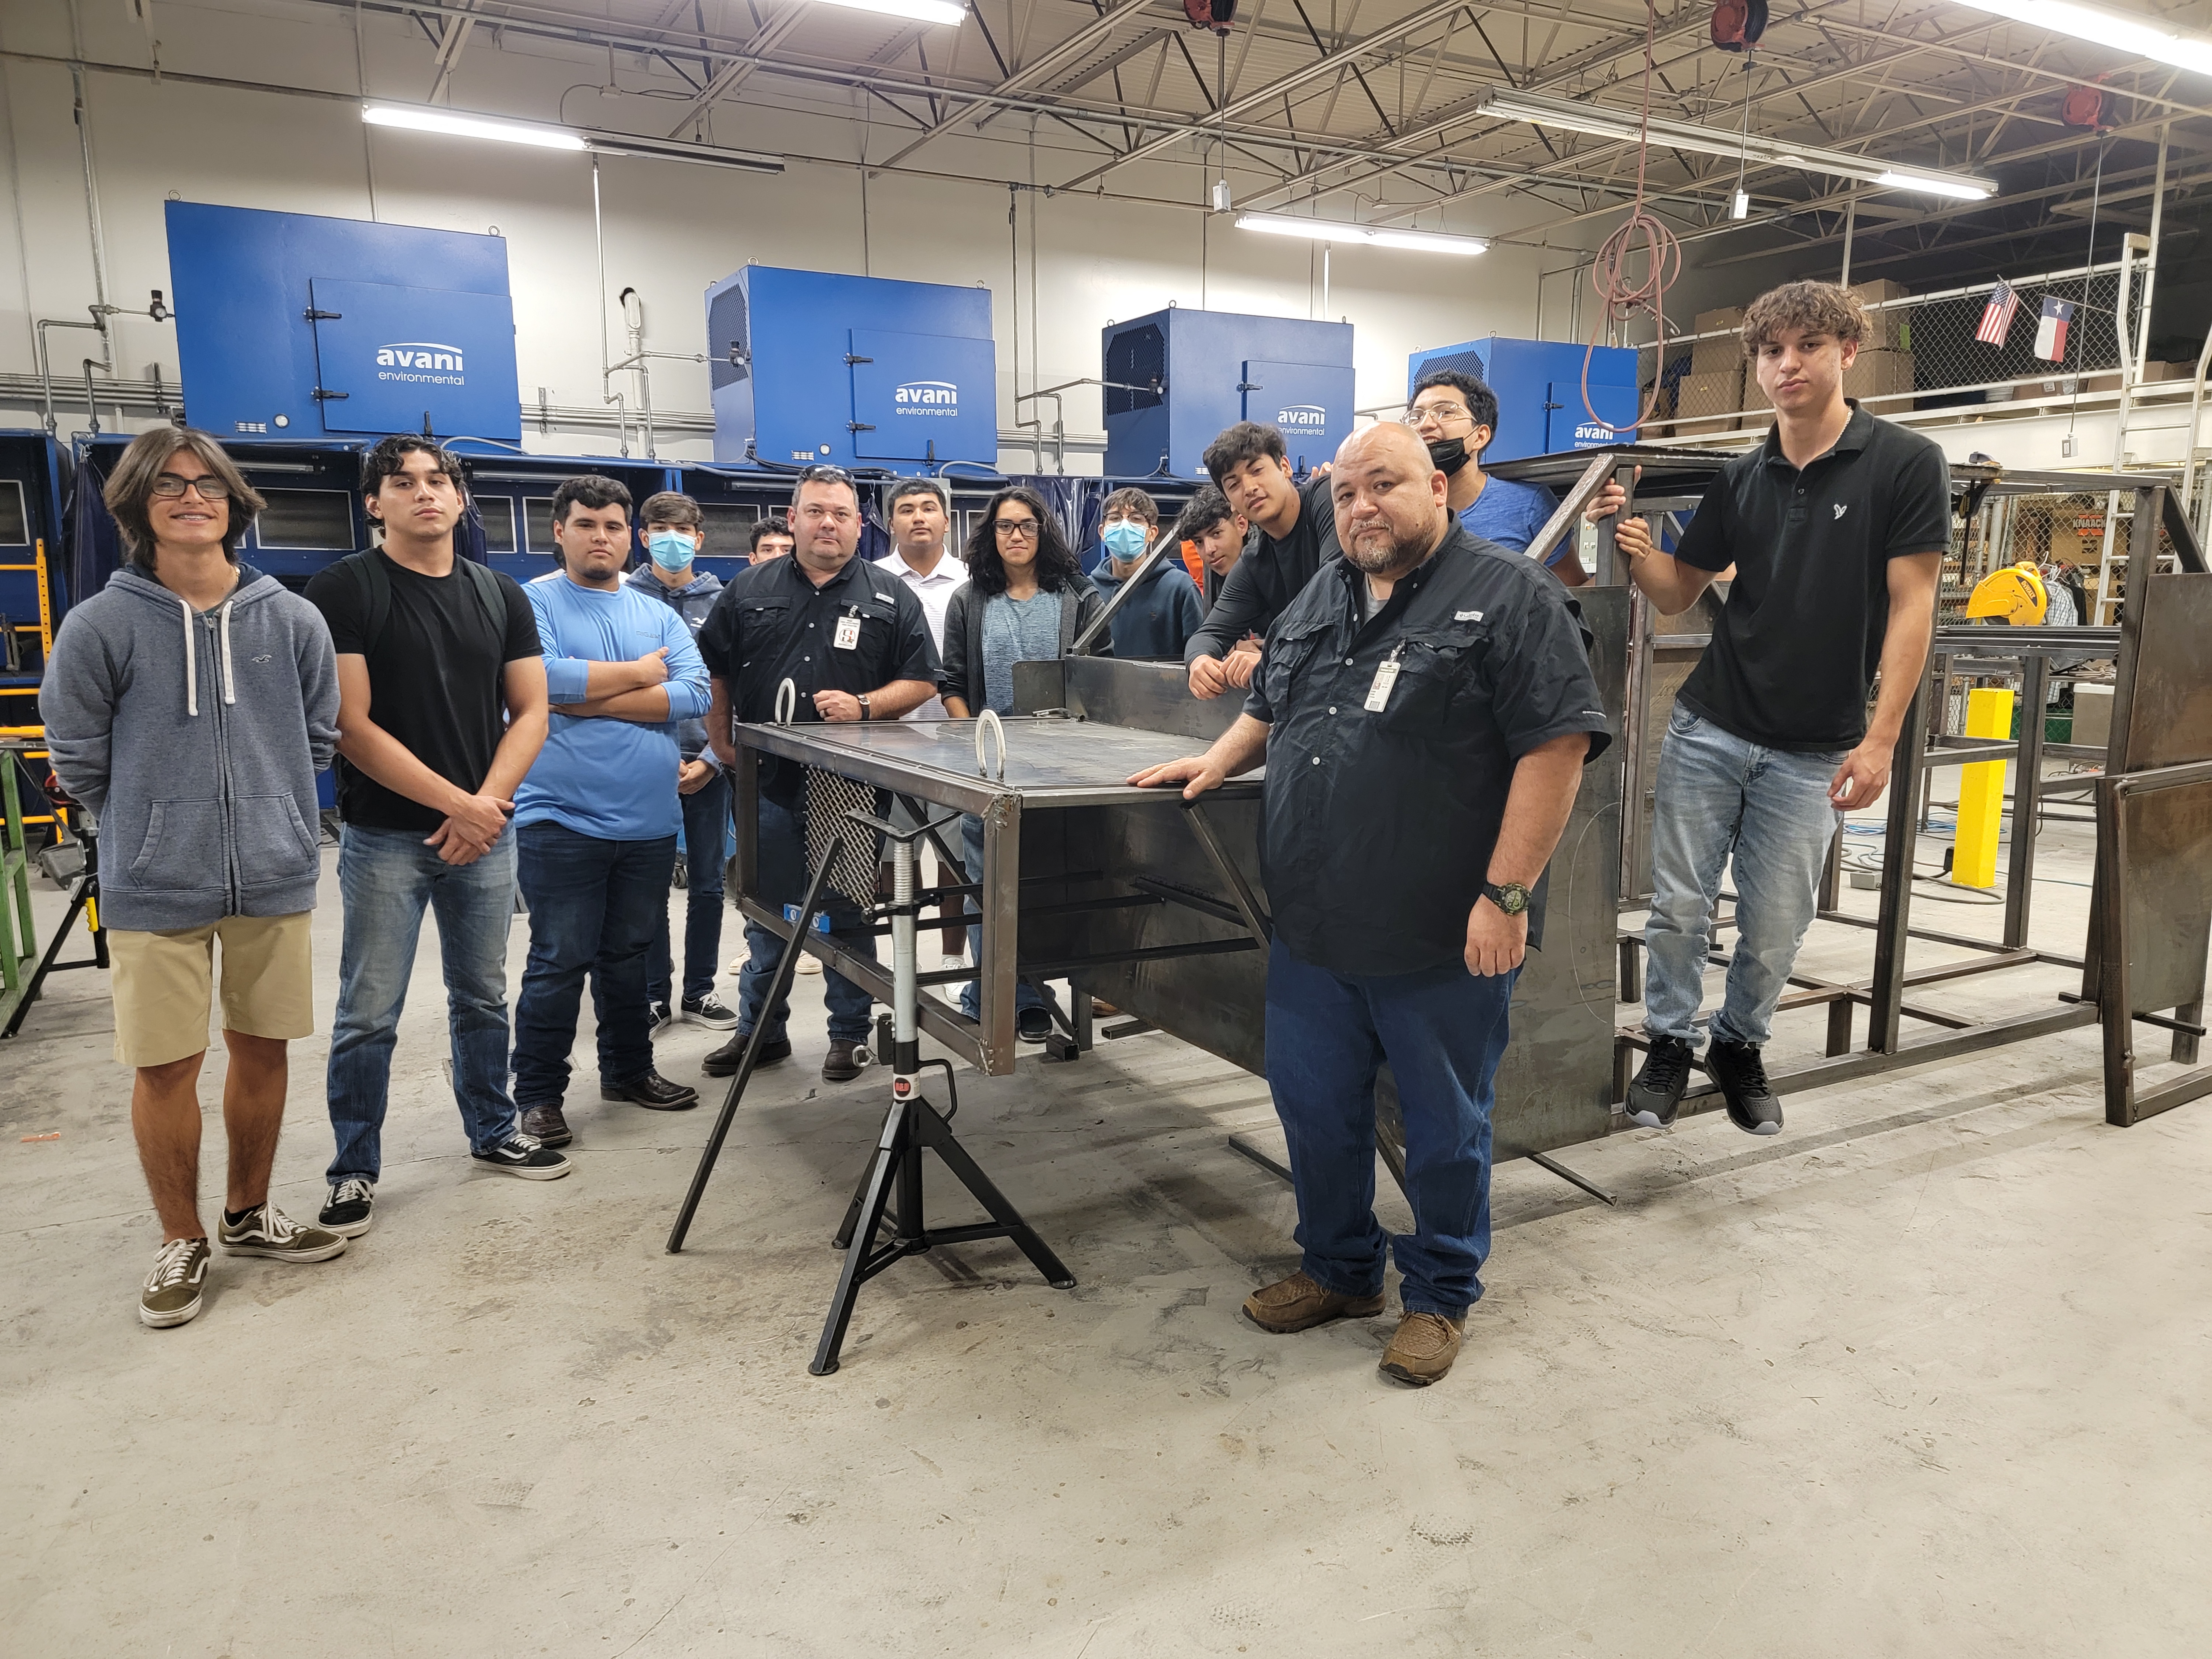 Welding students build vehicle prop for Fire Academy